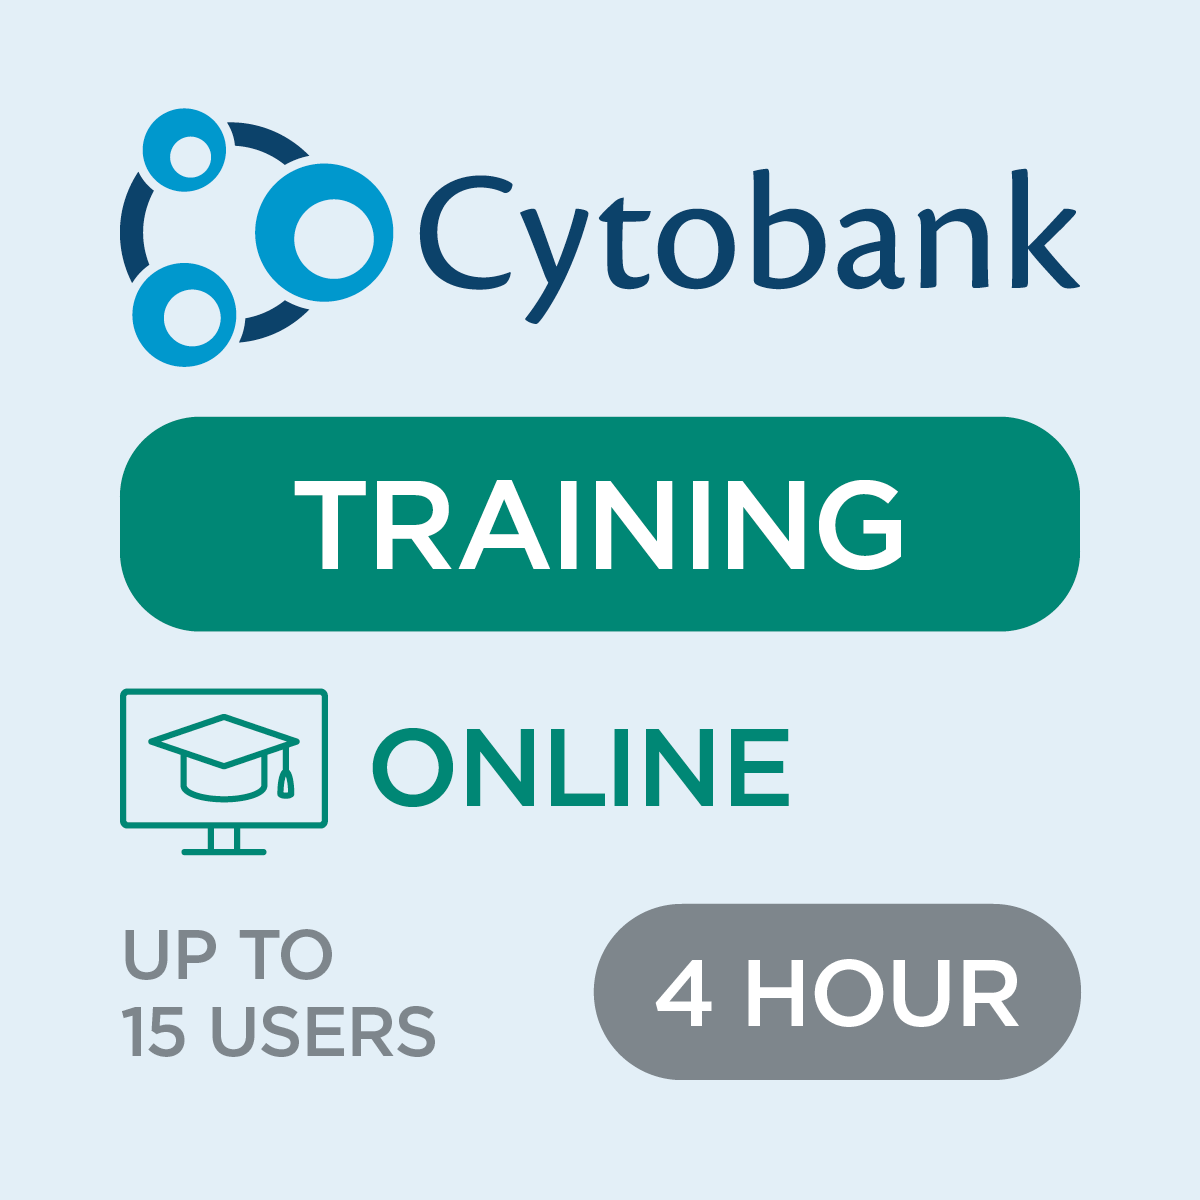 c47408,  Online Cytobank Training, Up-to-15-users, 4-hour